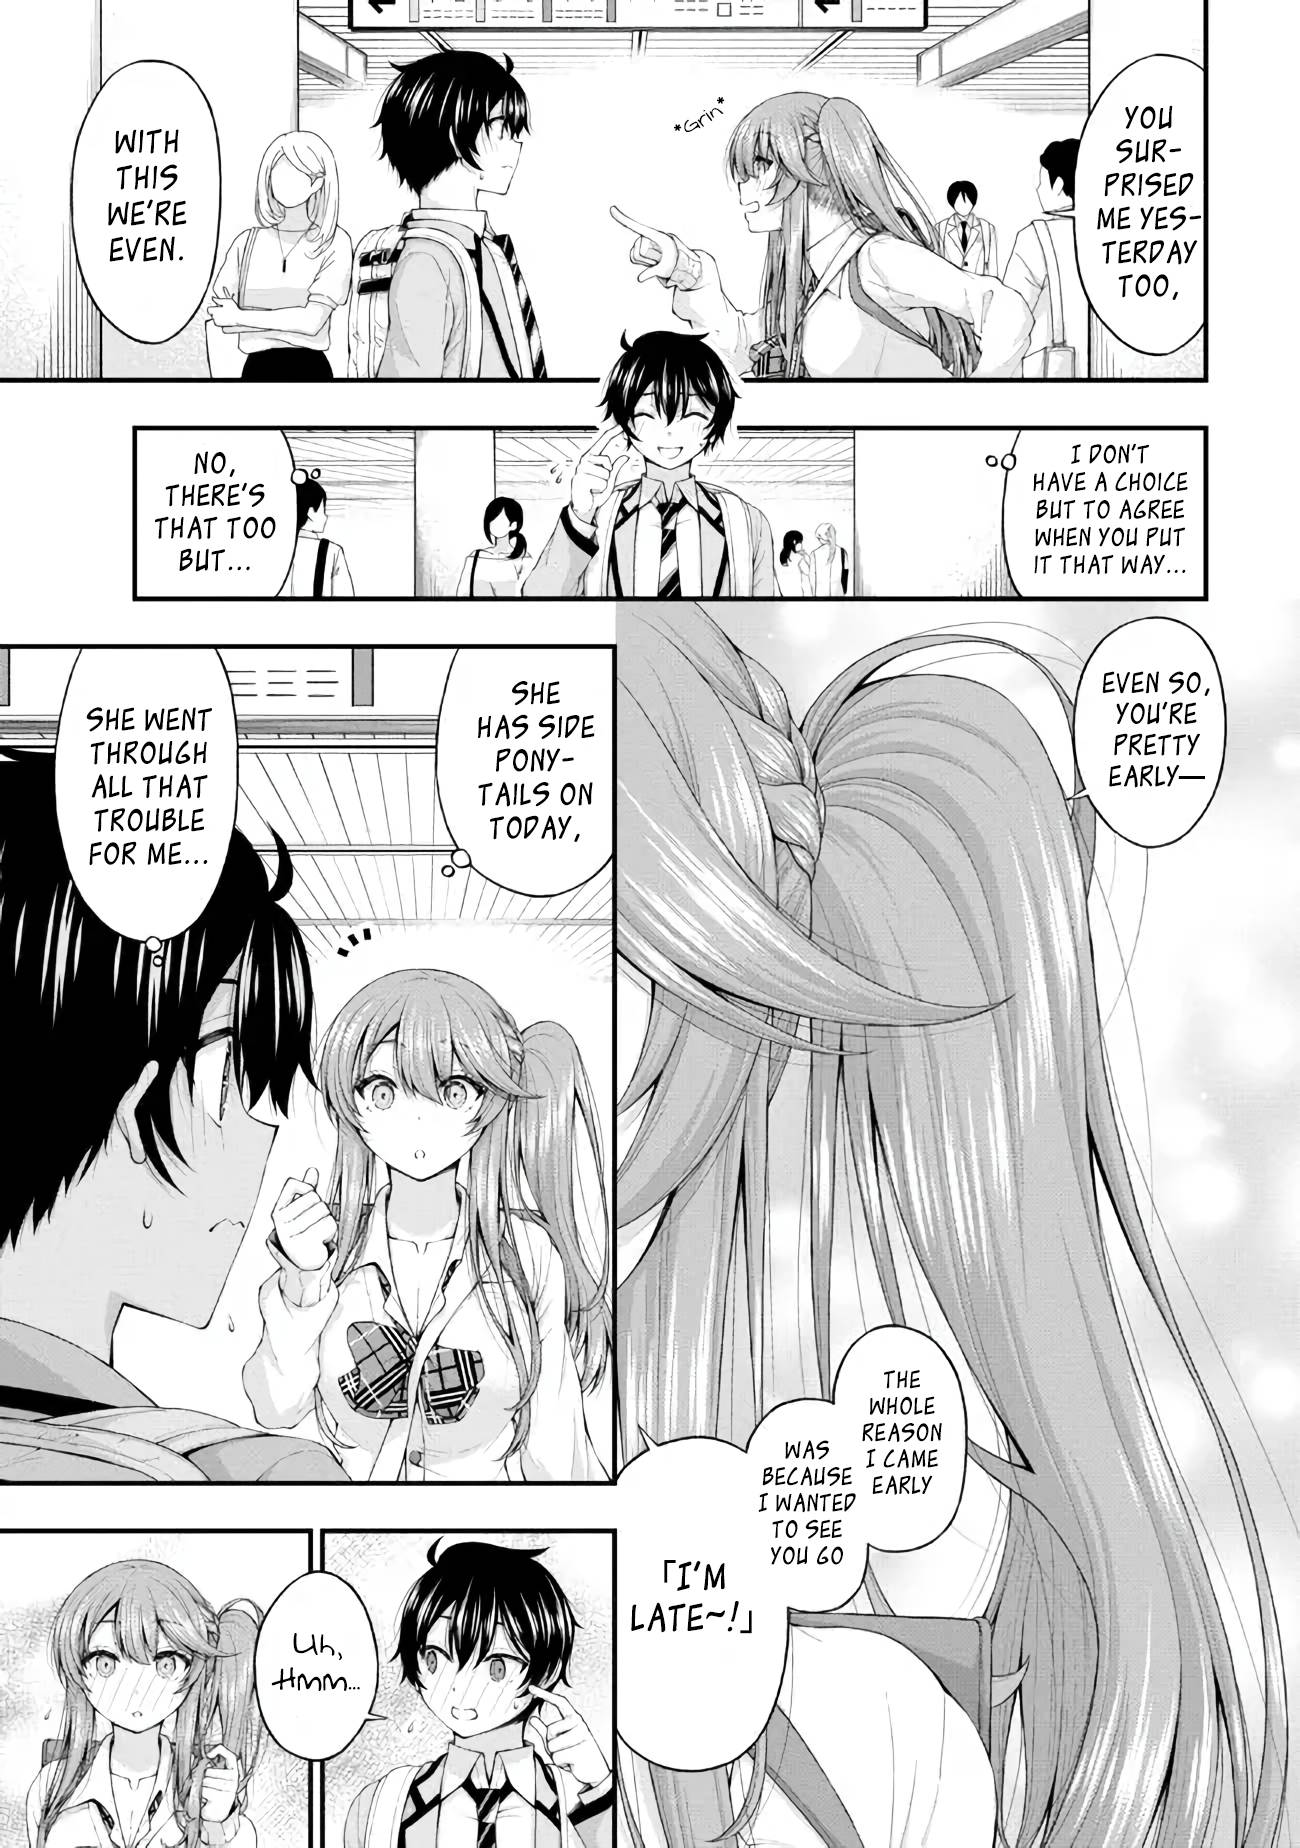 The Gal Who Was Meant to Confess to Me as a Game Punishment - chapter 5 - #3